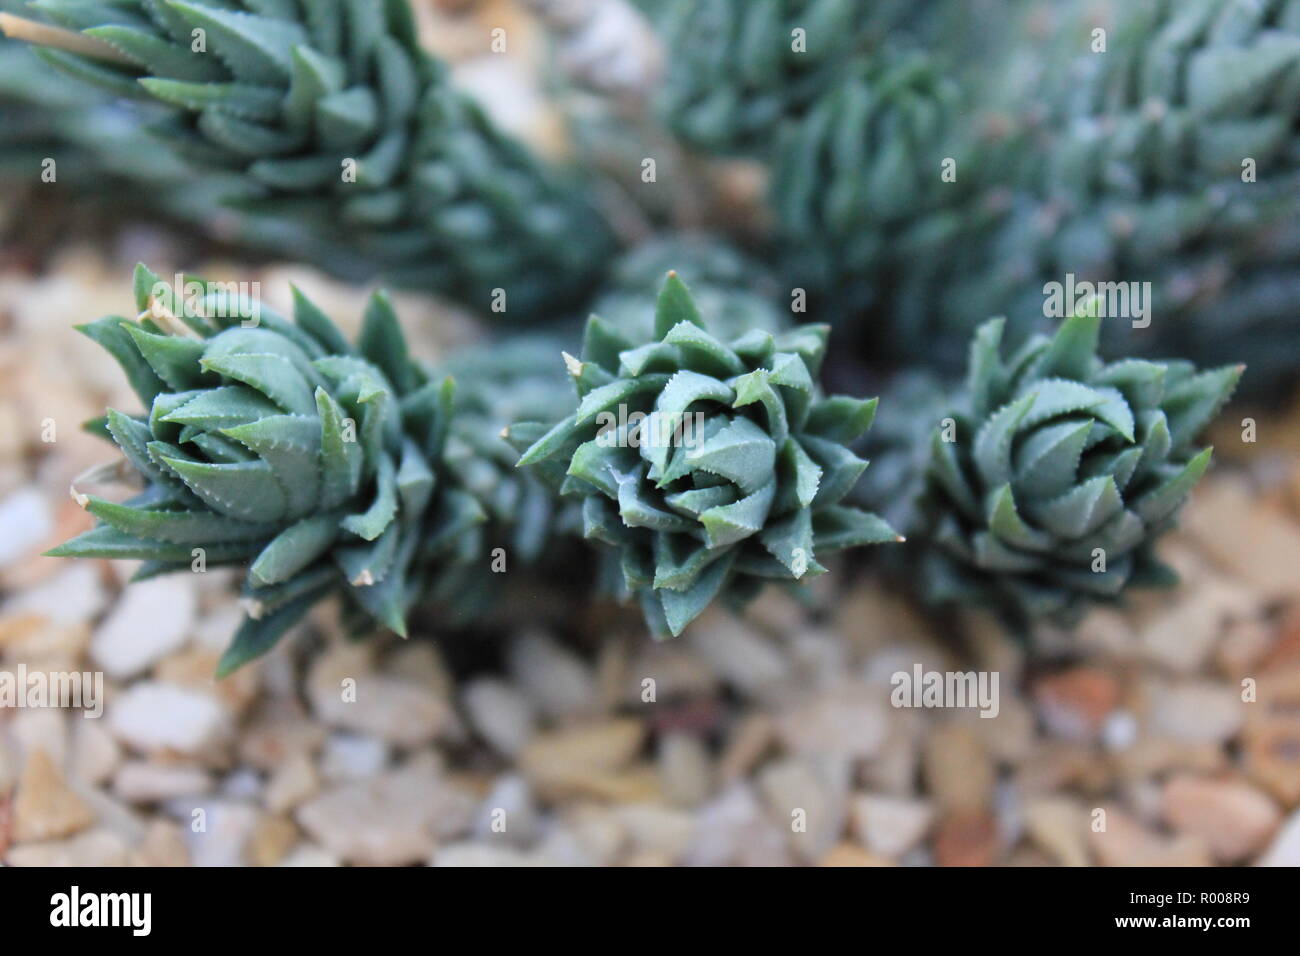 Astroloba cultivated ornamental cactus and succulent desert plant growing in an arid environment. Stock Photo